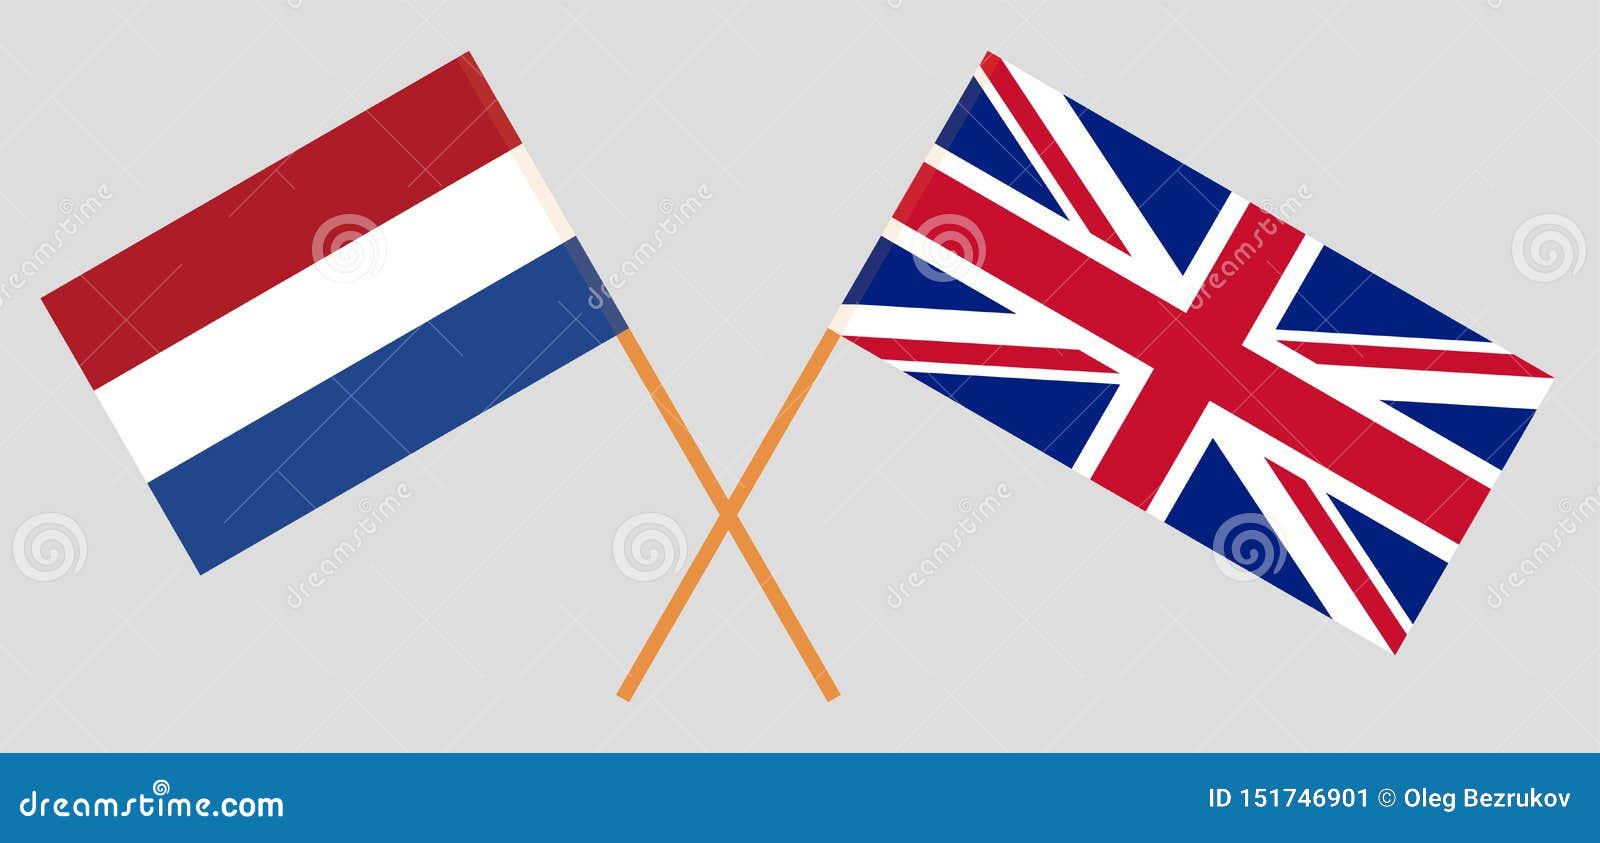 The Uk And Netherlands British And Netherlandish Flags Stock Vector